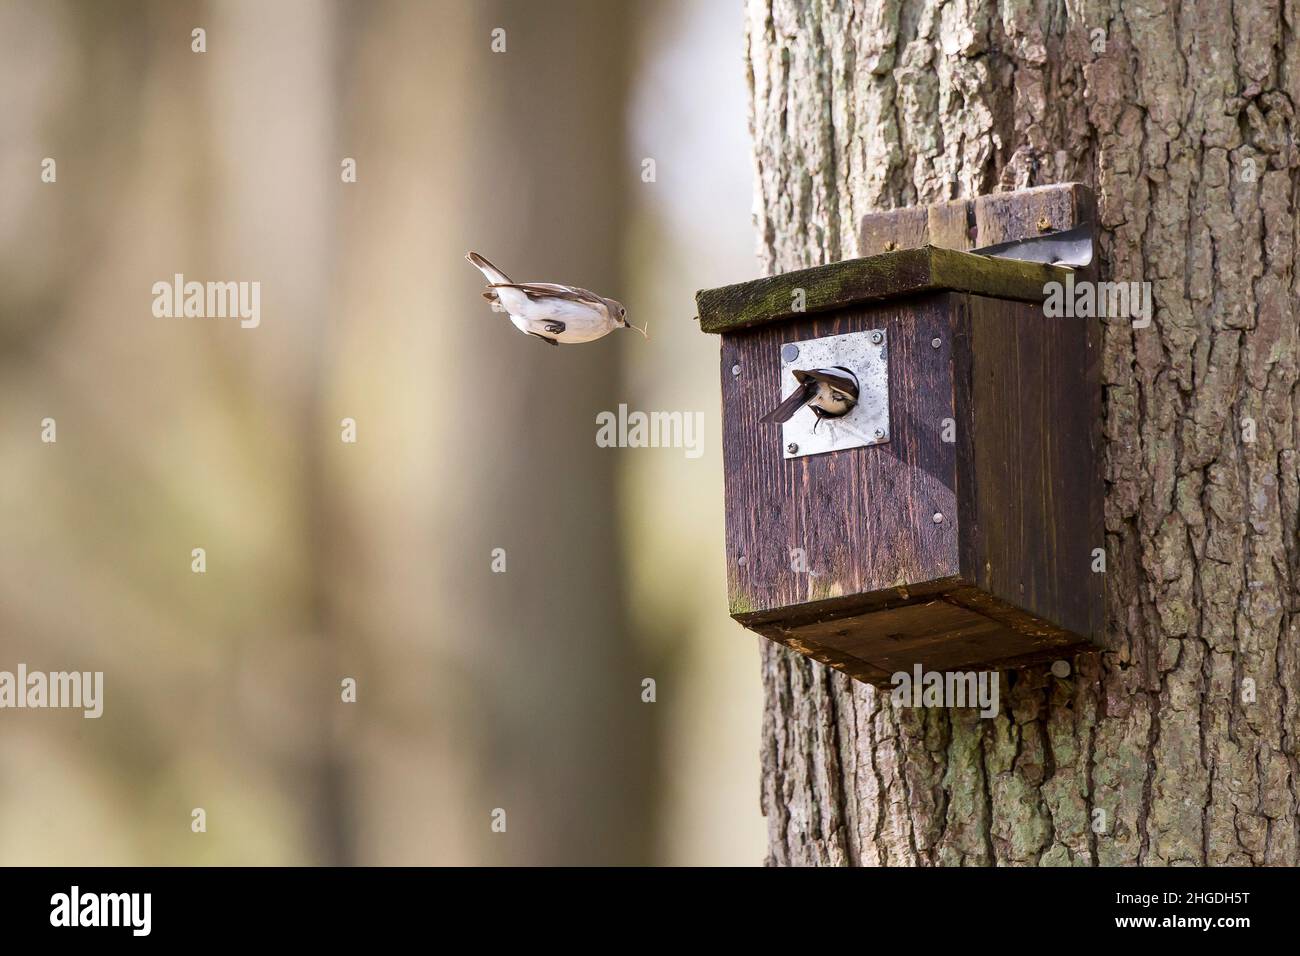 A breeding pair of wild pied flycatcher birds (Ficedula hypoleuca) captured flying into a woodland nesting box with nest material. Stock Photo